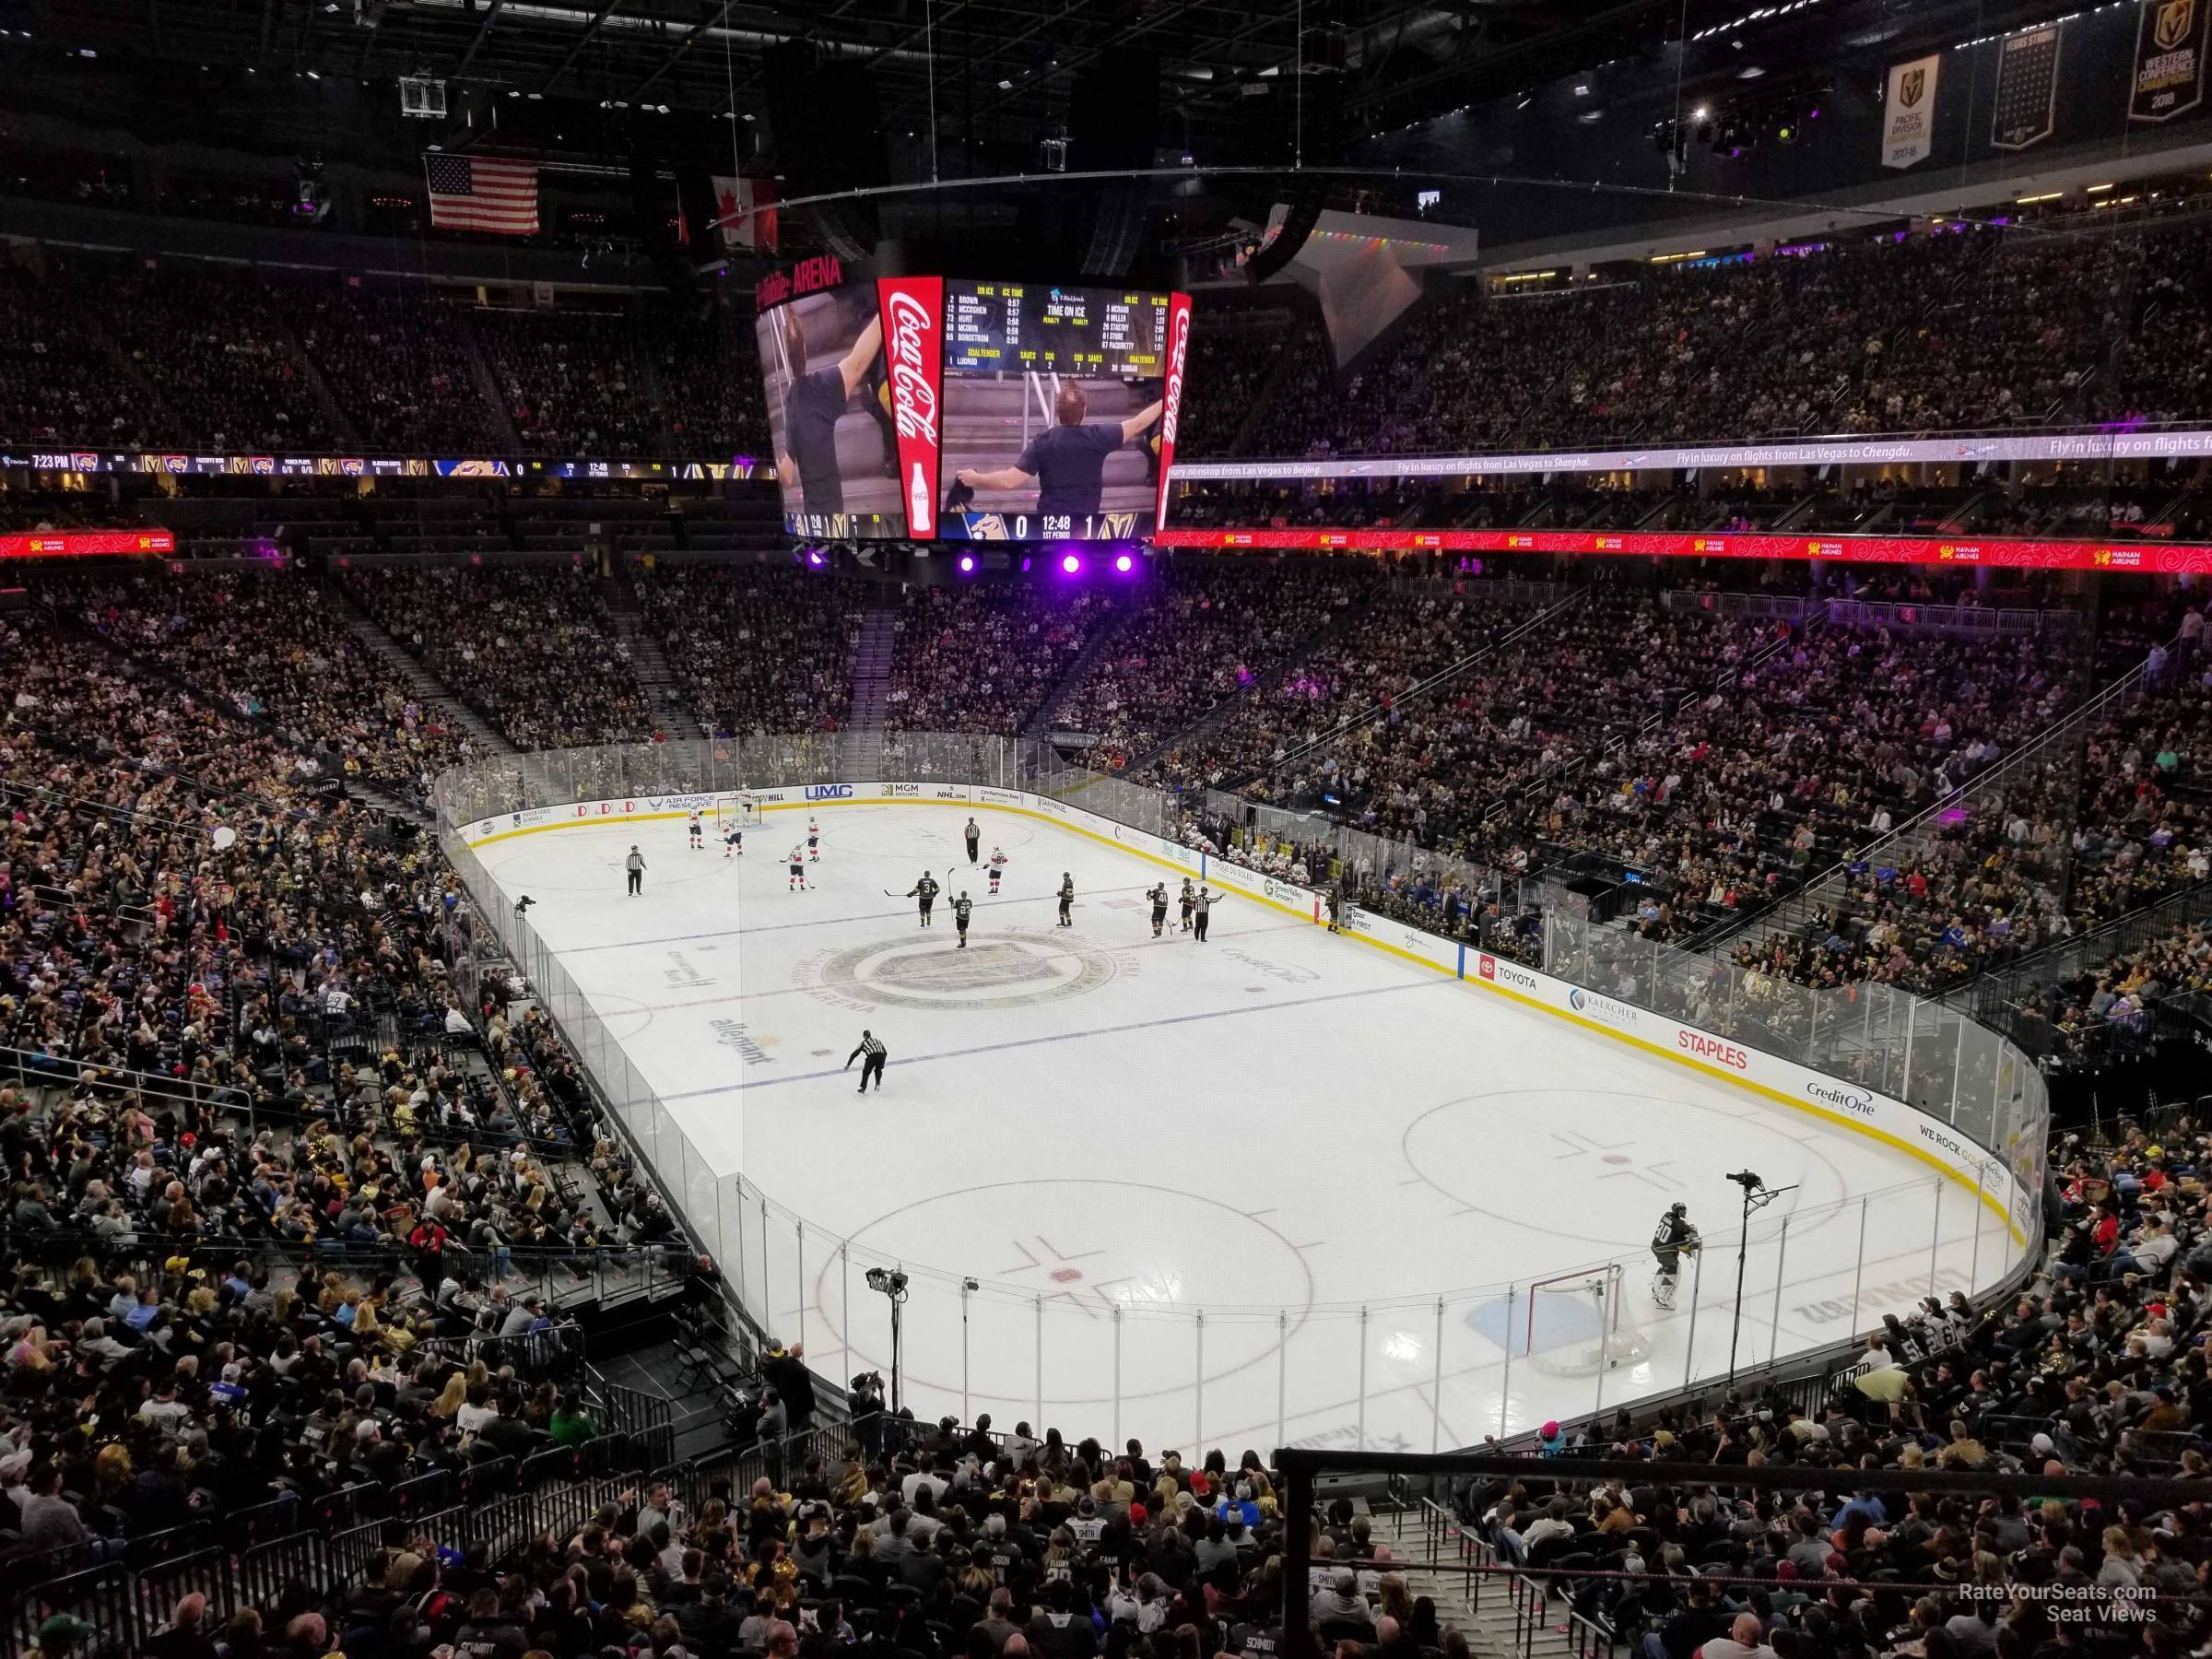 Section 18 at T-Mobile Arena 